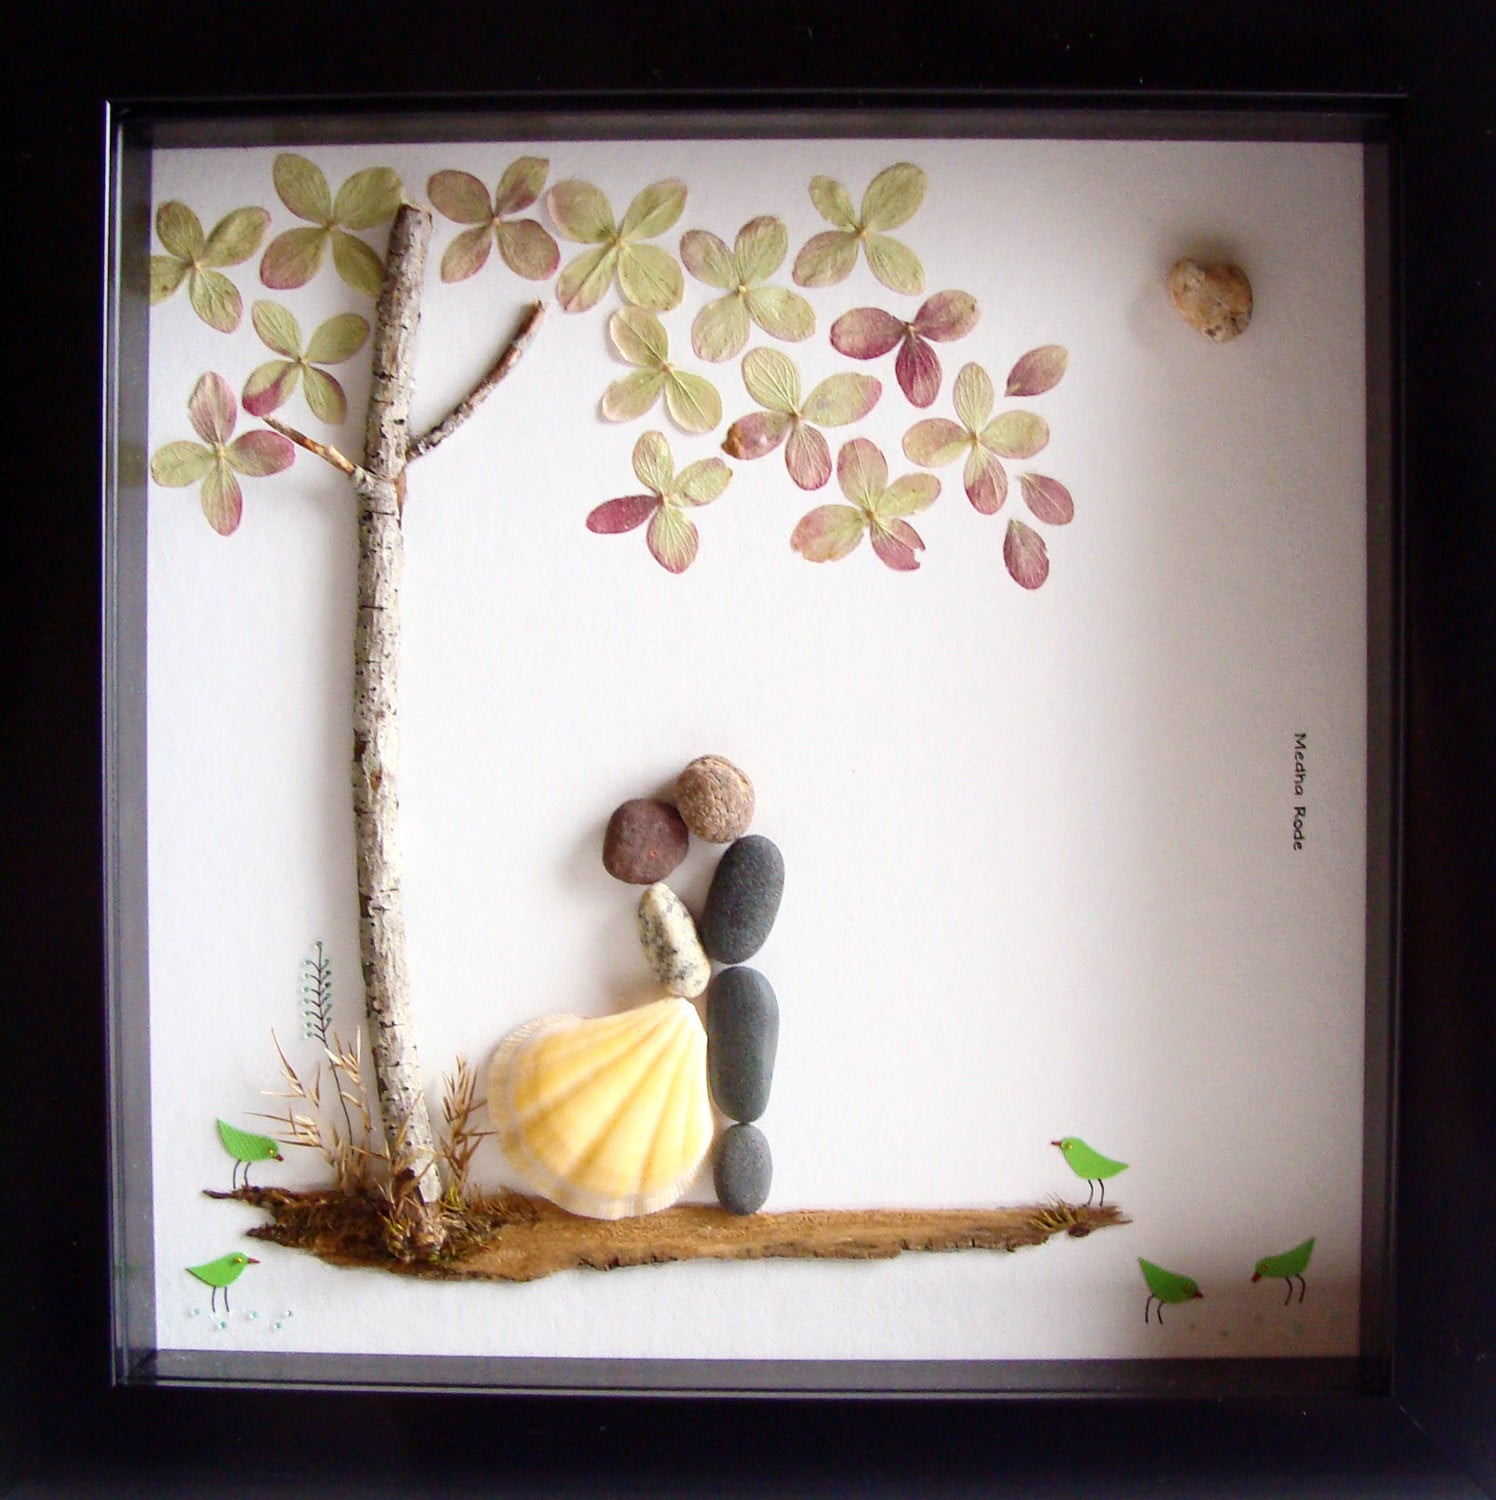 Cool Wedding Gift Ideas For Couples
 Unique Wedding Gift For Couple Wedding Pebble Art Unique